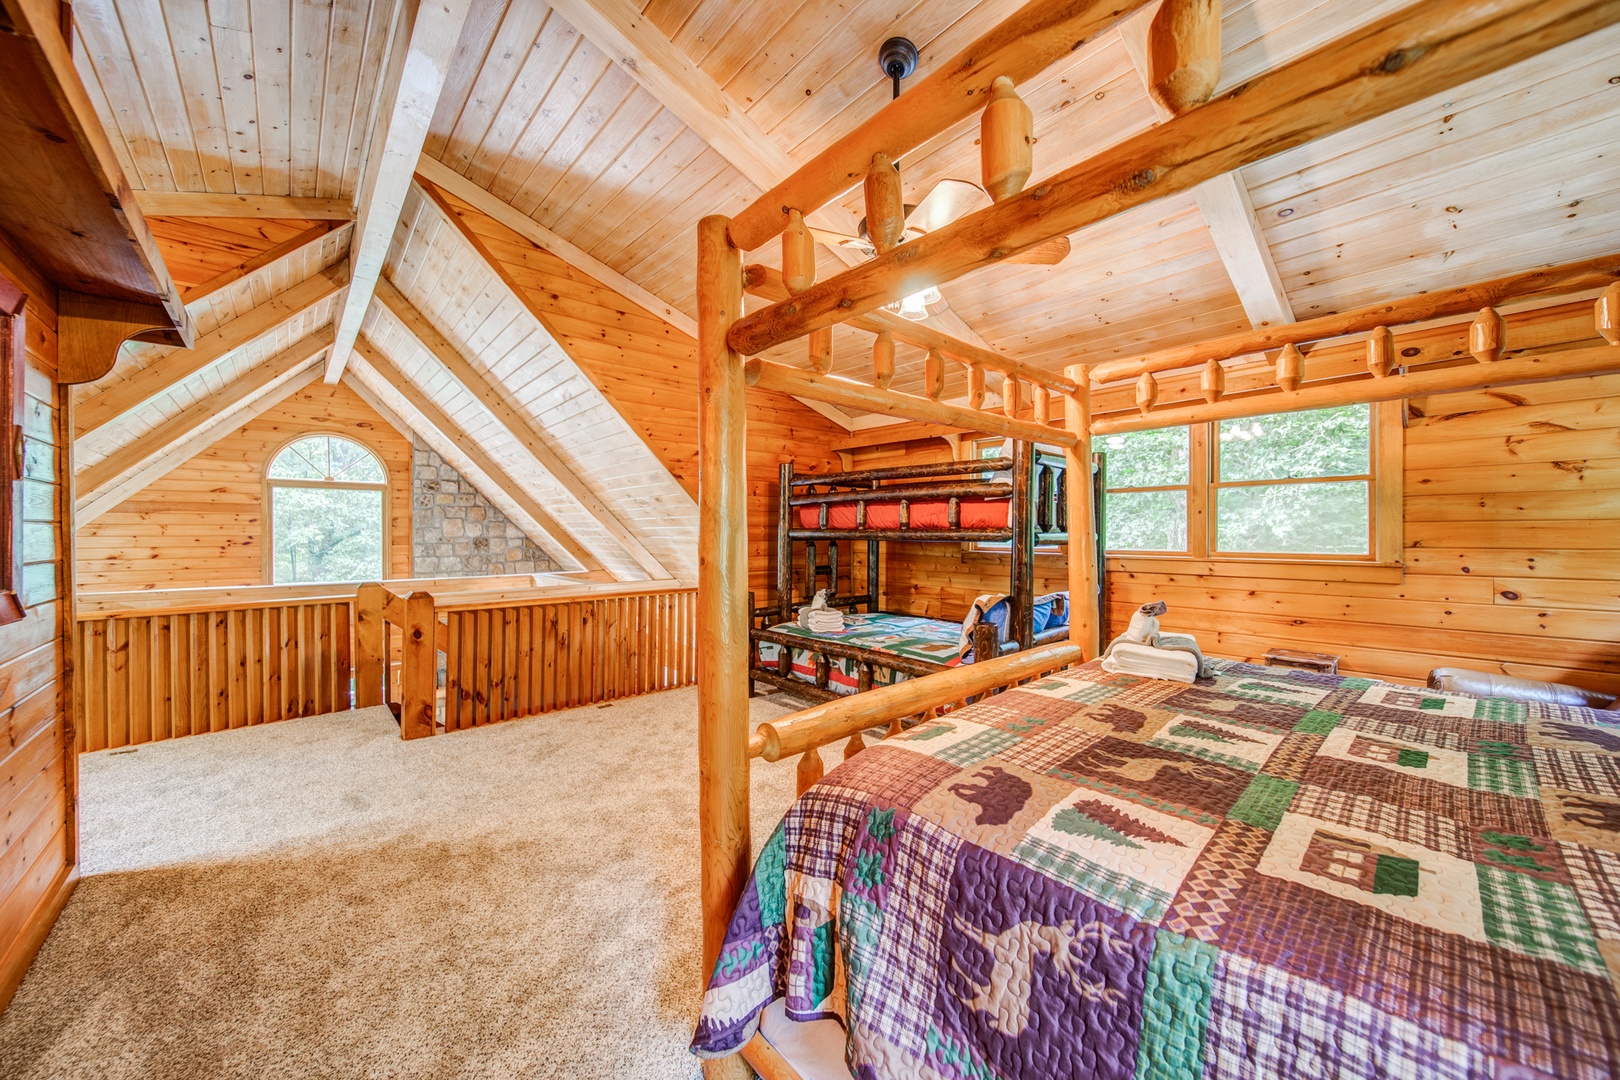 Loft sleeping area, with king bed, twin-over-full bunks, & attached bathroom